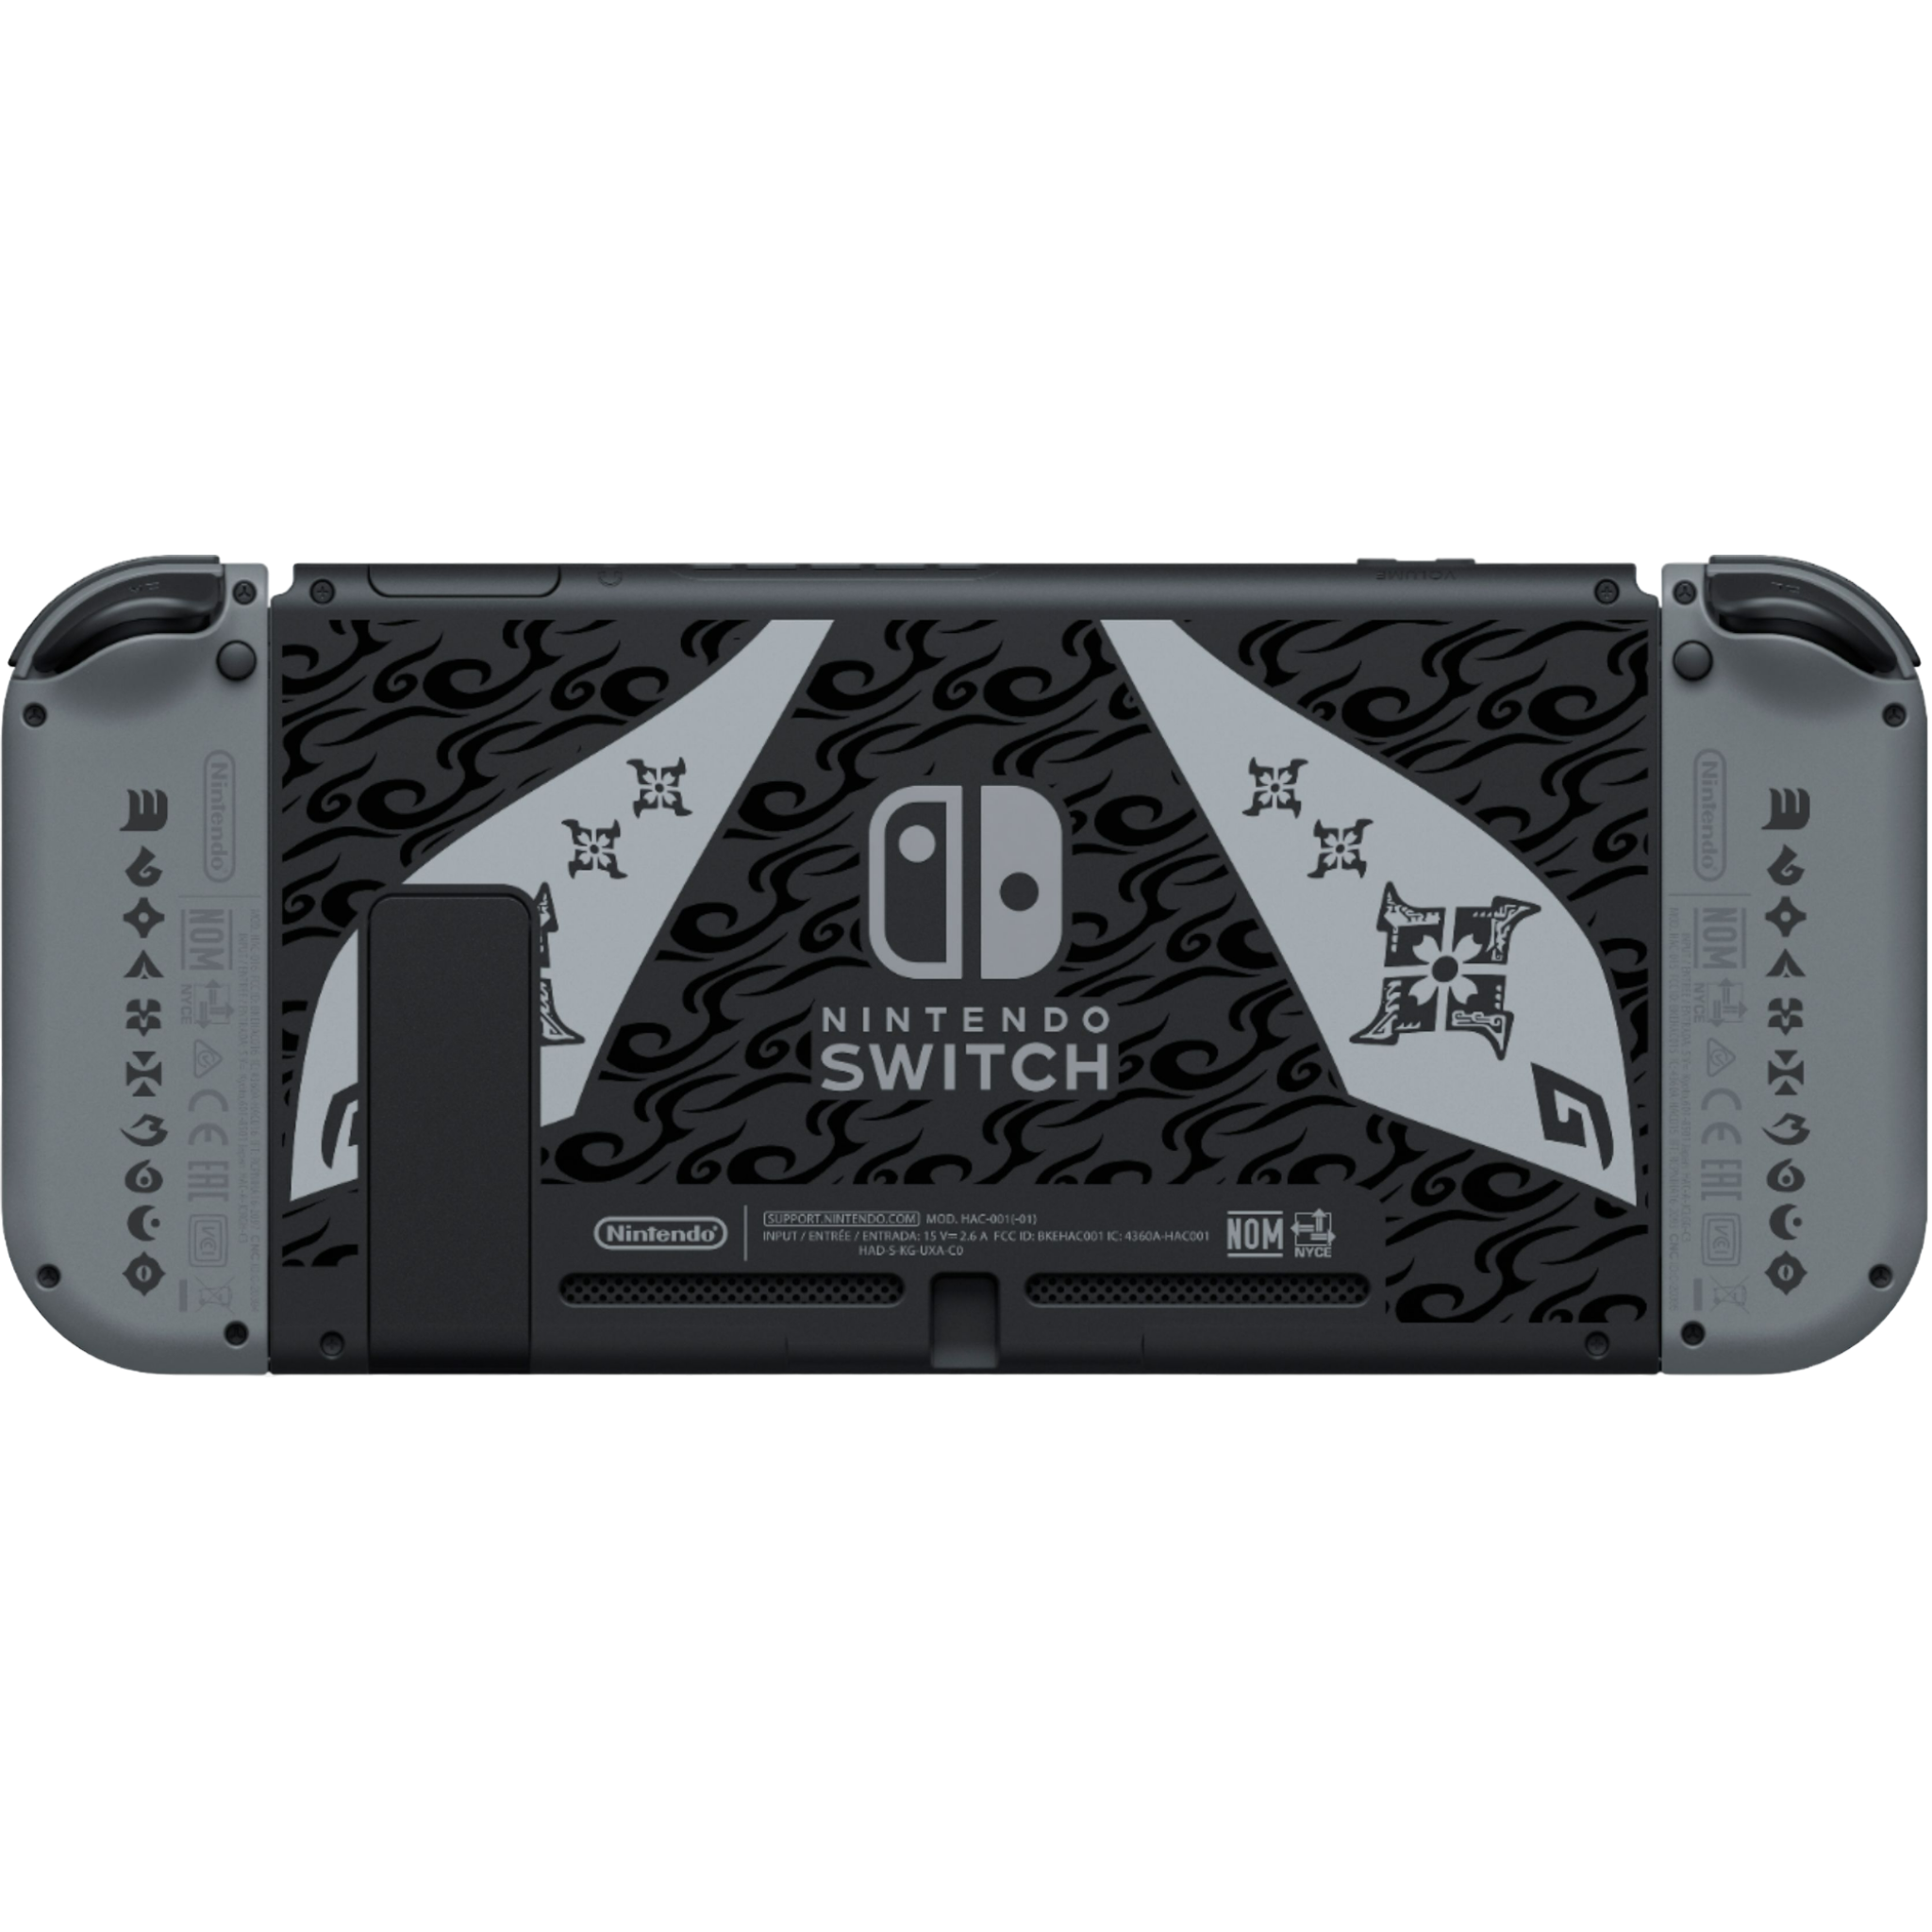 Nintendo Switch MONSTER HUNTER RISE Deluxe Edition System - Gray - Pro-Distributing